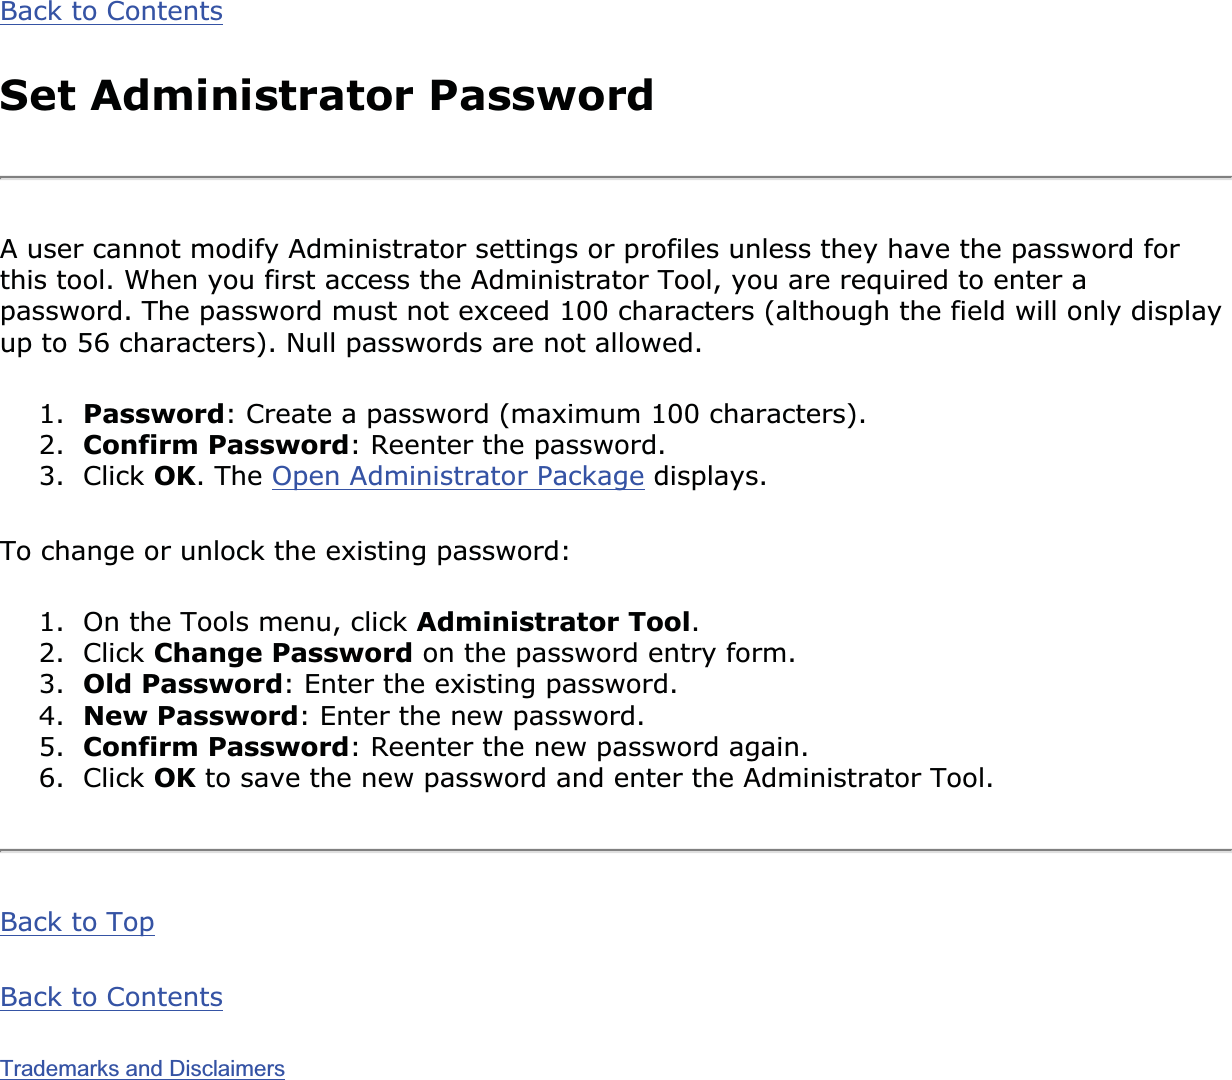 Back to ContentsSet Administrator PasswordA user cannot modify Administrator settings or profiles unless they have the password for this tool. When you first access the Administrator Tool, you are required to enter a password. The password must not exceed 100 characters (although the field will only display up to 56 characters). Null passwords are not allowed.1. Password: Create a password (maximum 100 characters).2. Confirm Password: Reenter the password.3. Click OK. The Open Administrator Package displays.To change or unlock the existing password:1. On the Tools menu, click Administrator Tool.2. Click Change Password on the password entry form.3. Old Password: Enter the existing password.4. New Password: Enter the new password.5. Confirm Password: Reenter the new password again.6. Click OK to save the new password and enter the Administrator Tool.Back to TopBack to ContentsTrademarks and Disclaimers